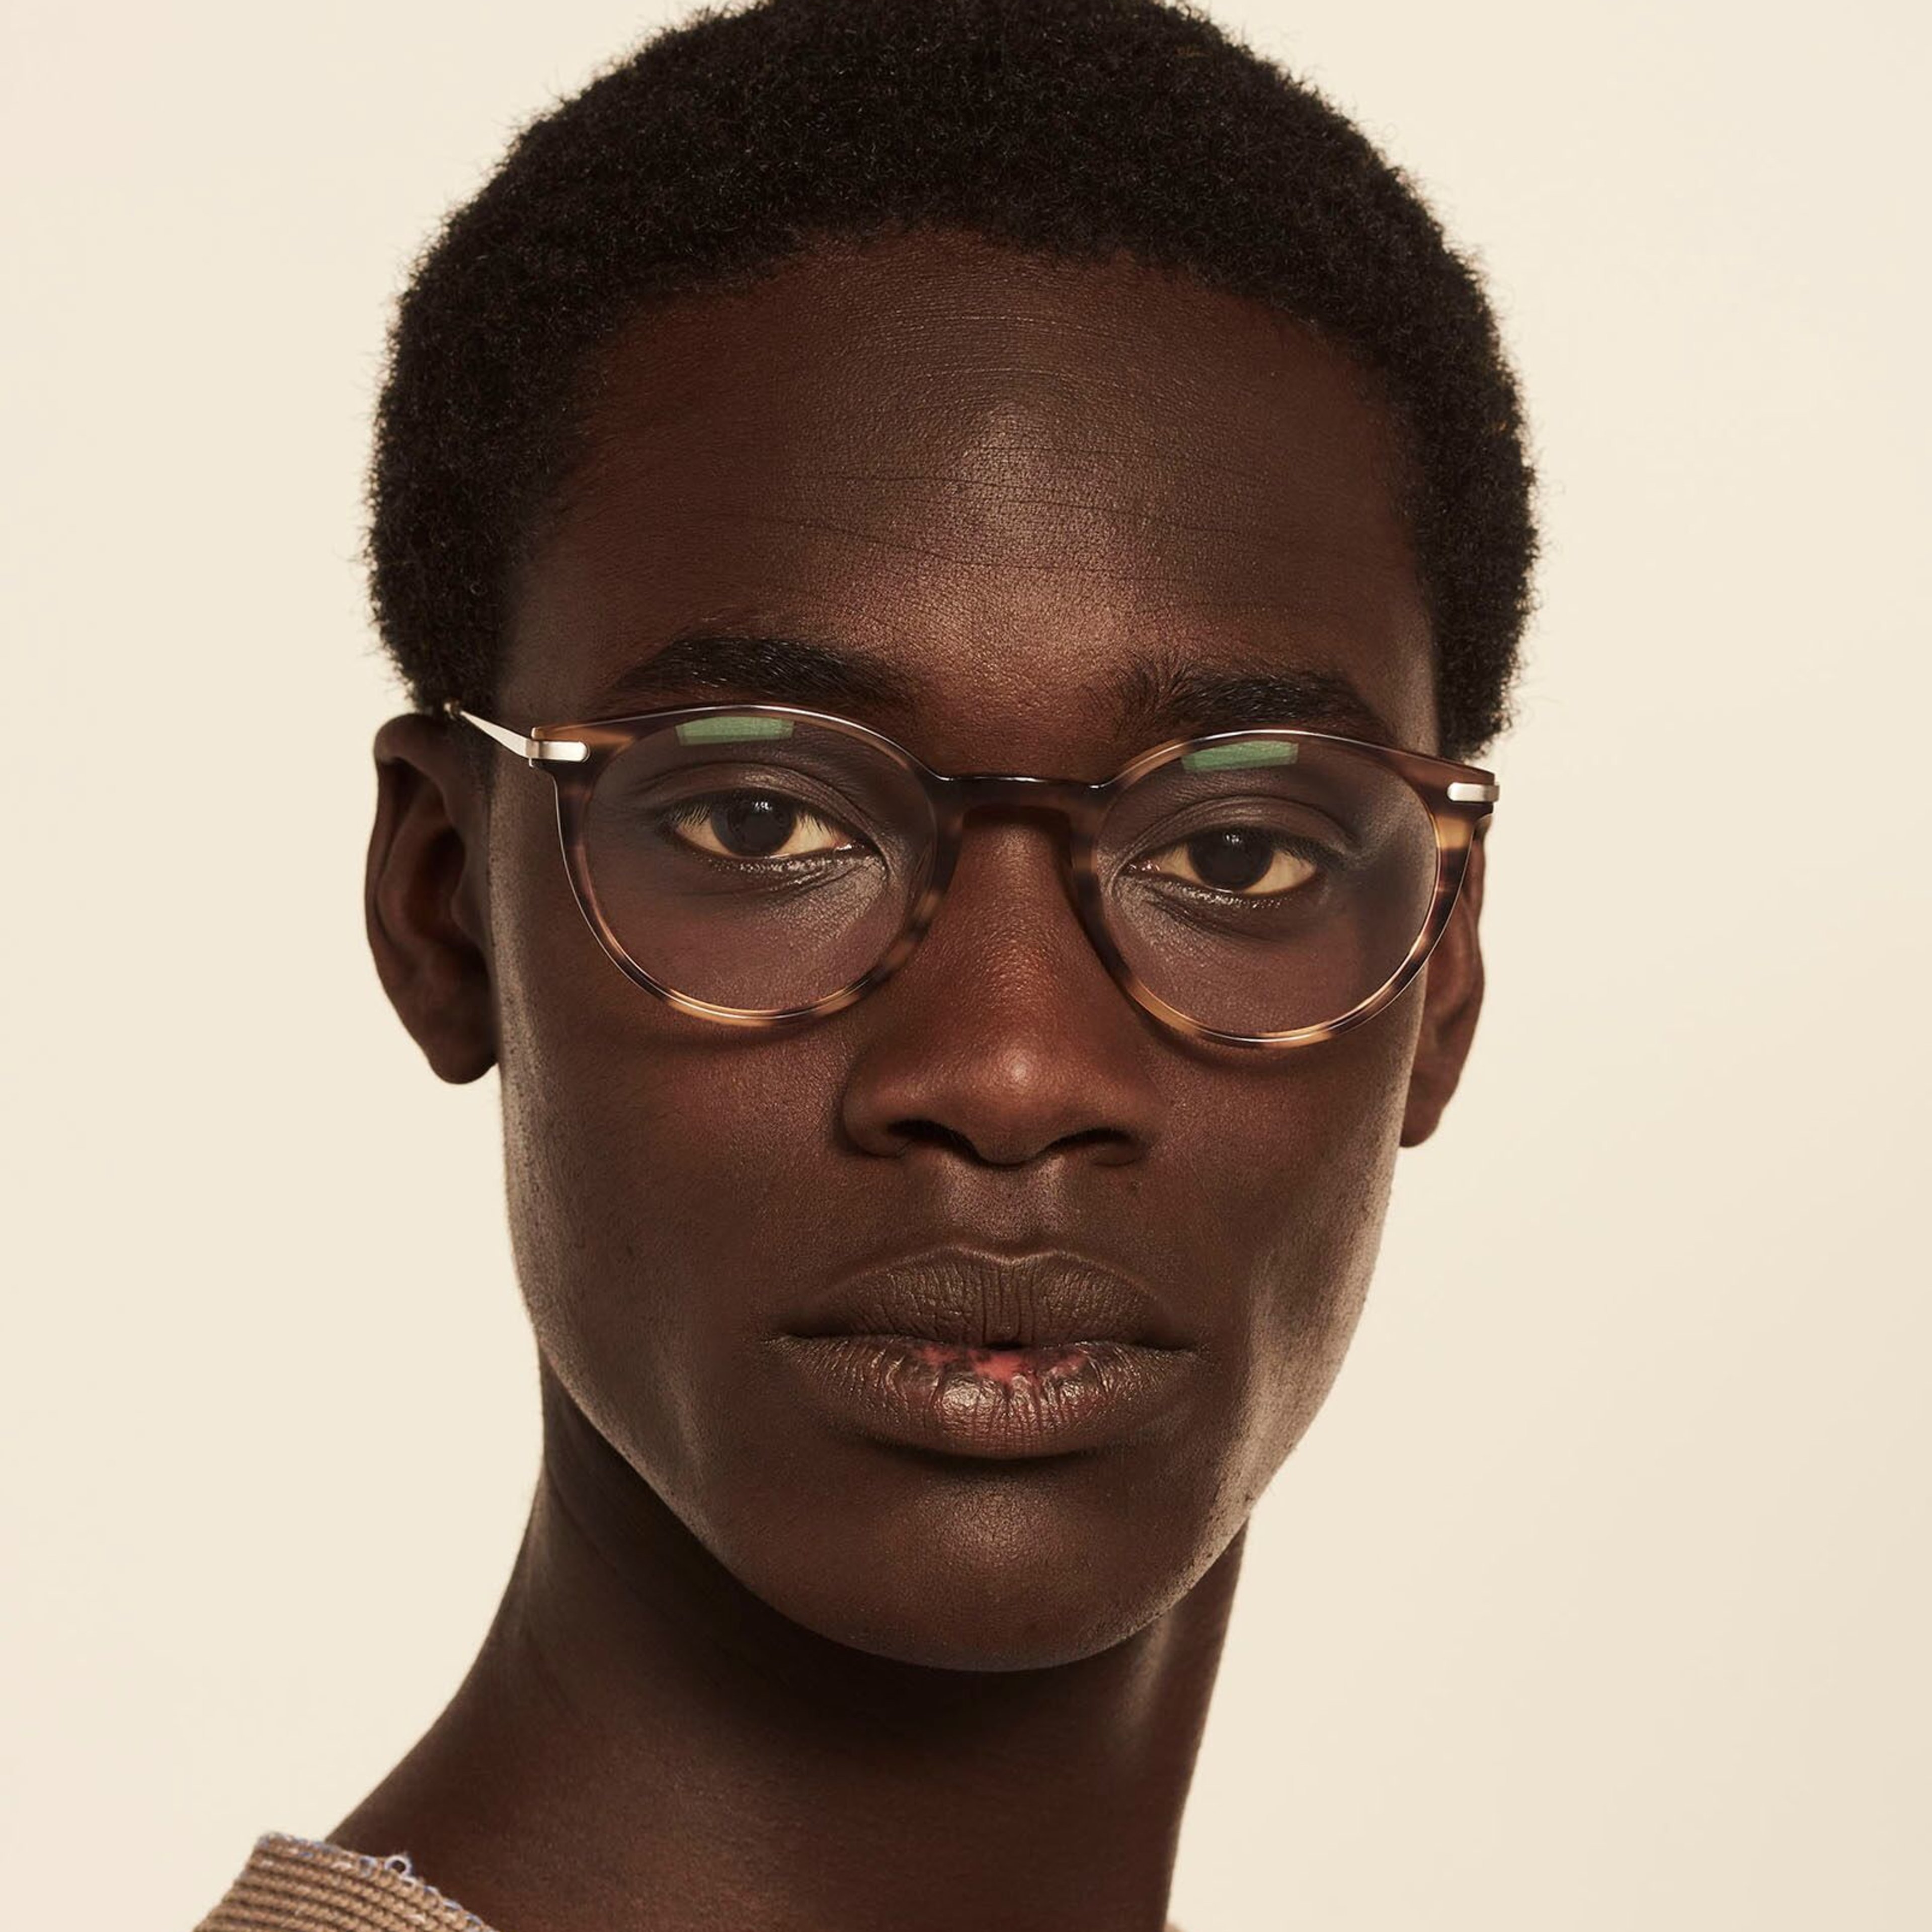 Ace & Tate Glasses | round acetate in Beige, Brown